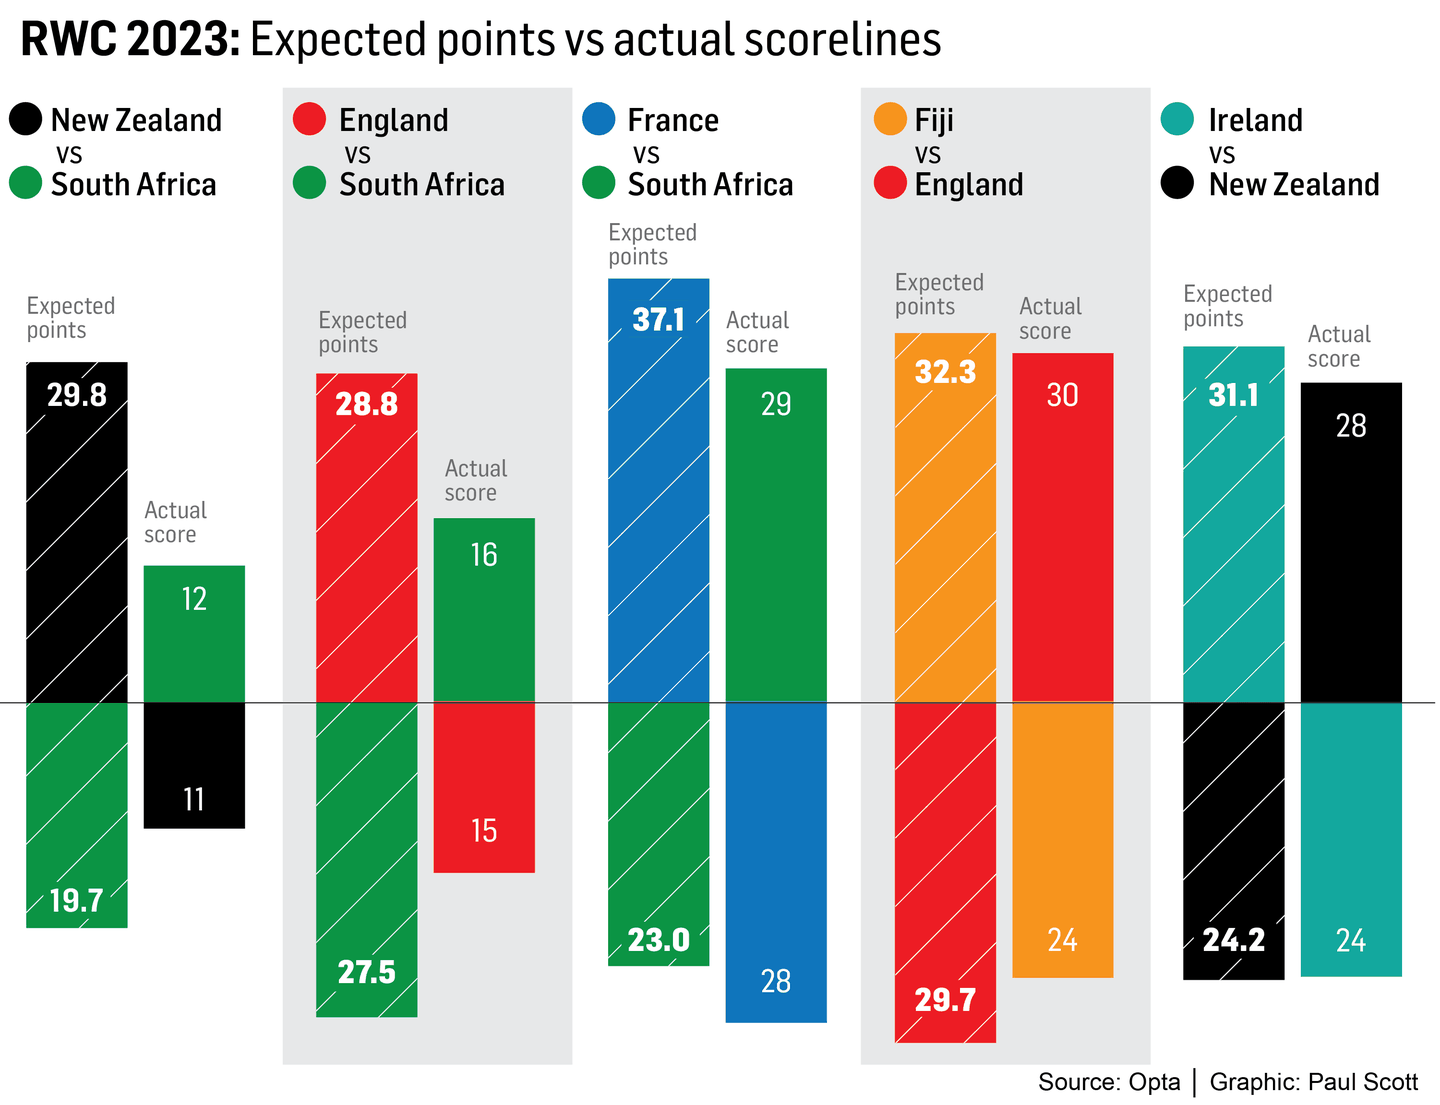 Expected points